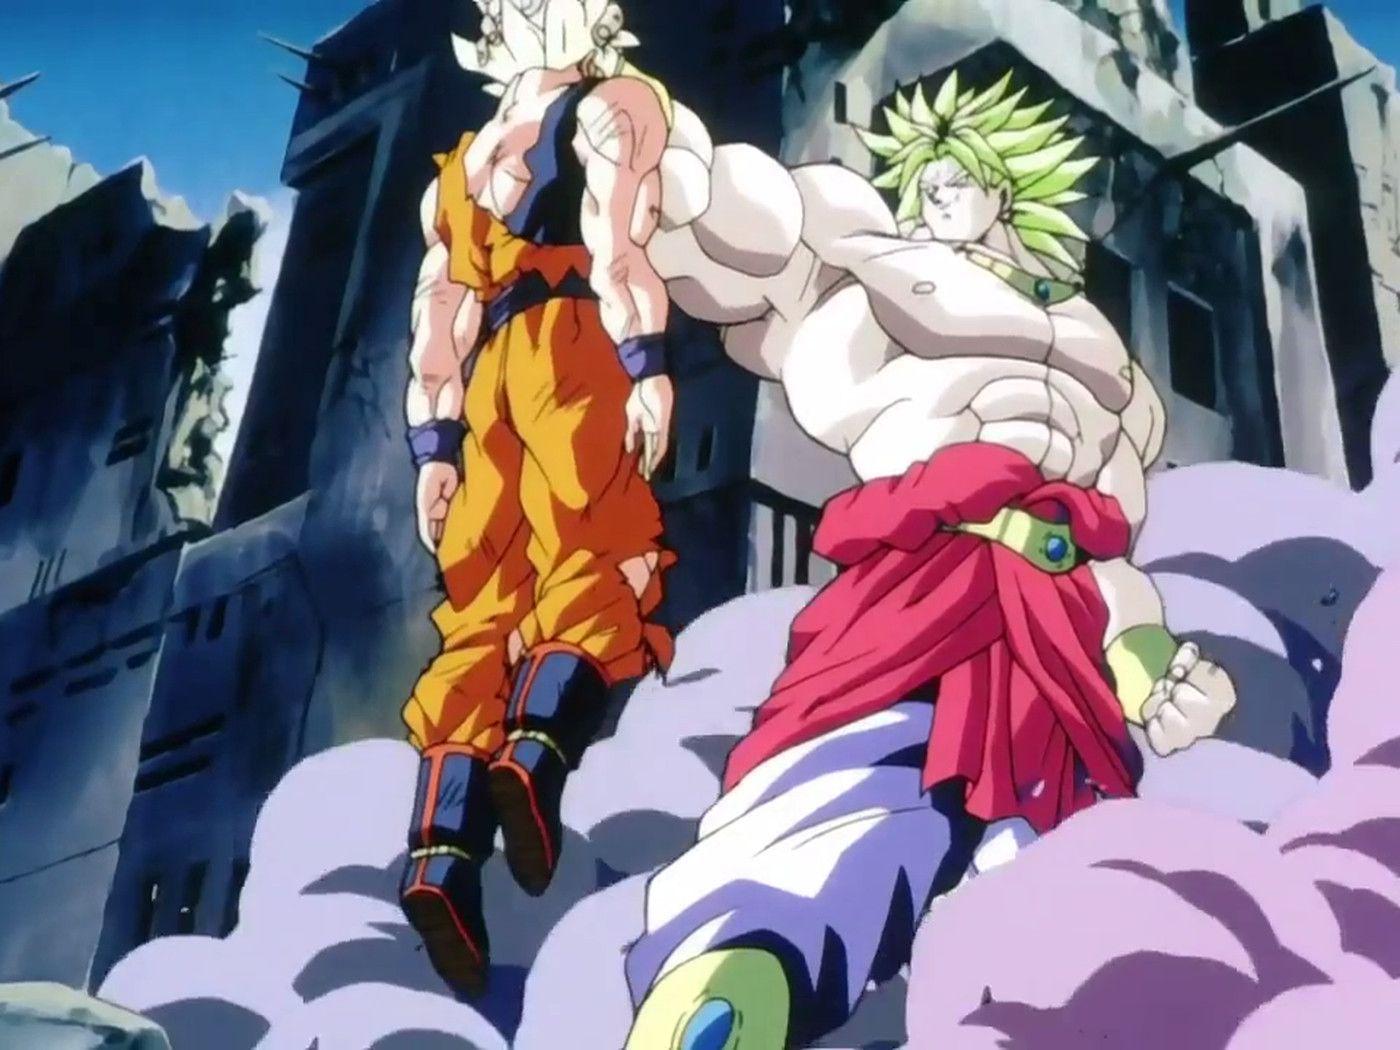 Dragon Ball Super's movie makes infamous Broly canon